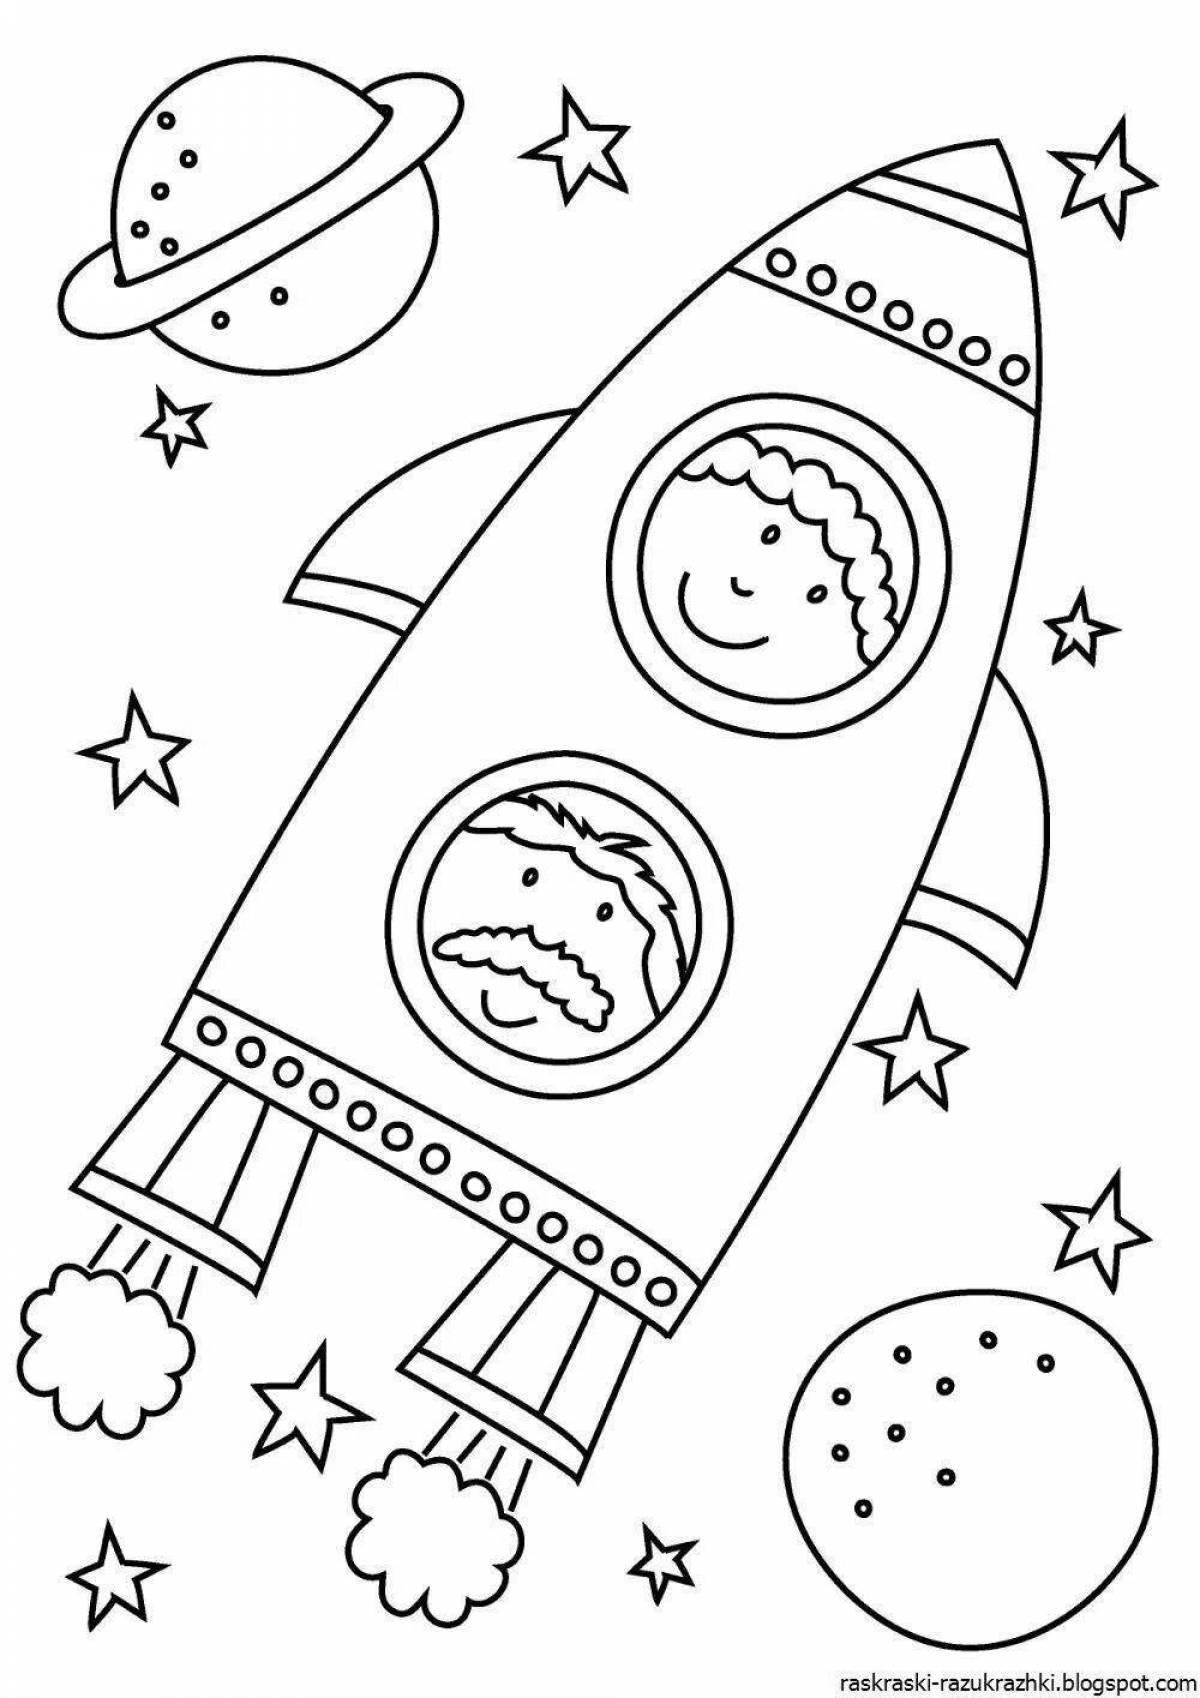 Bright space coloring book for 3-4 year olds